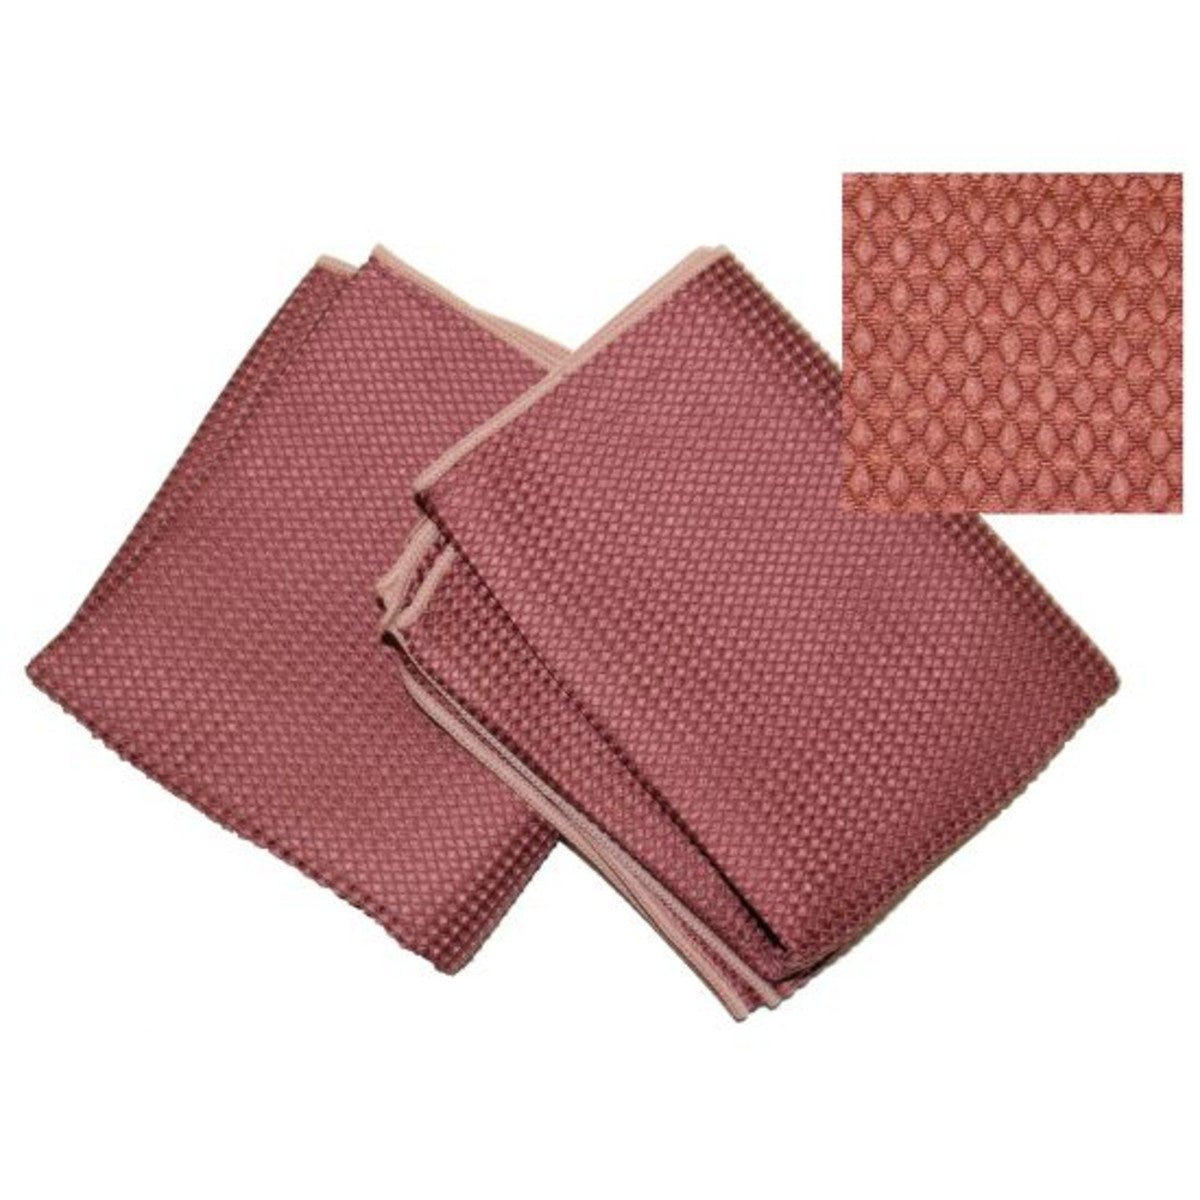 15 x 25 Inch Red Microfiber Waffle Textured Cloth